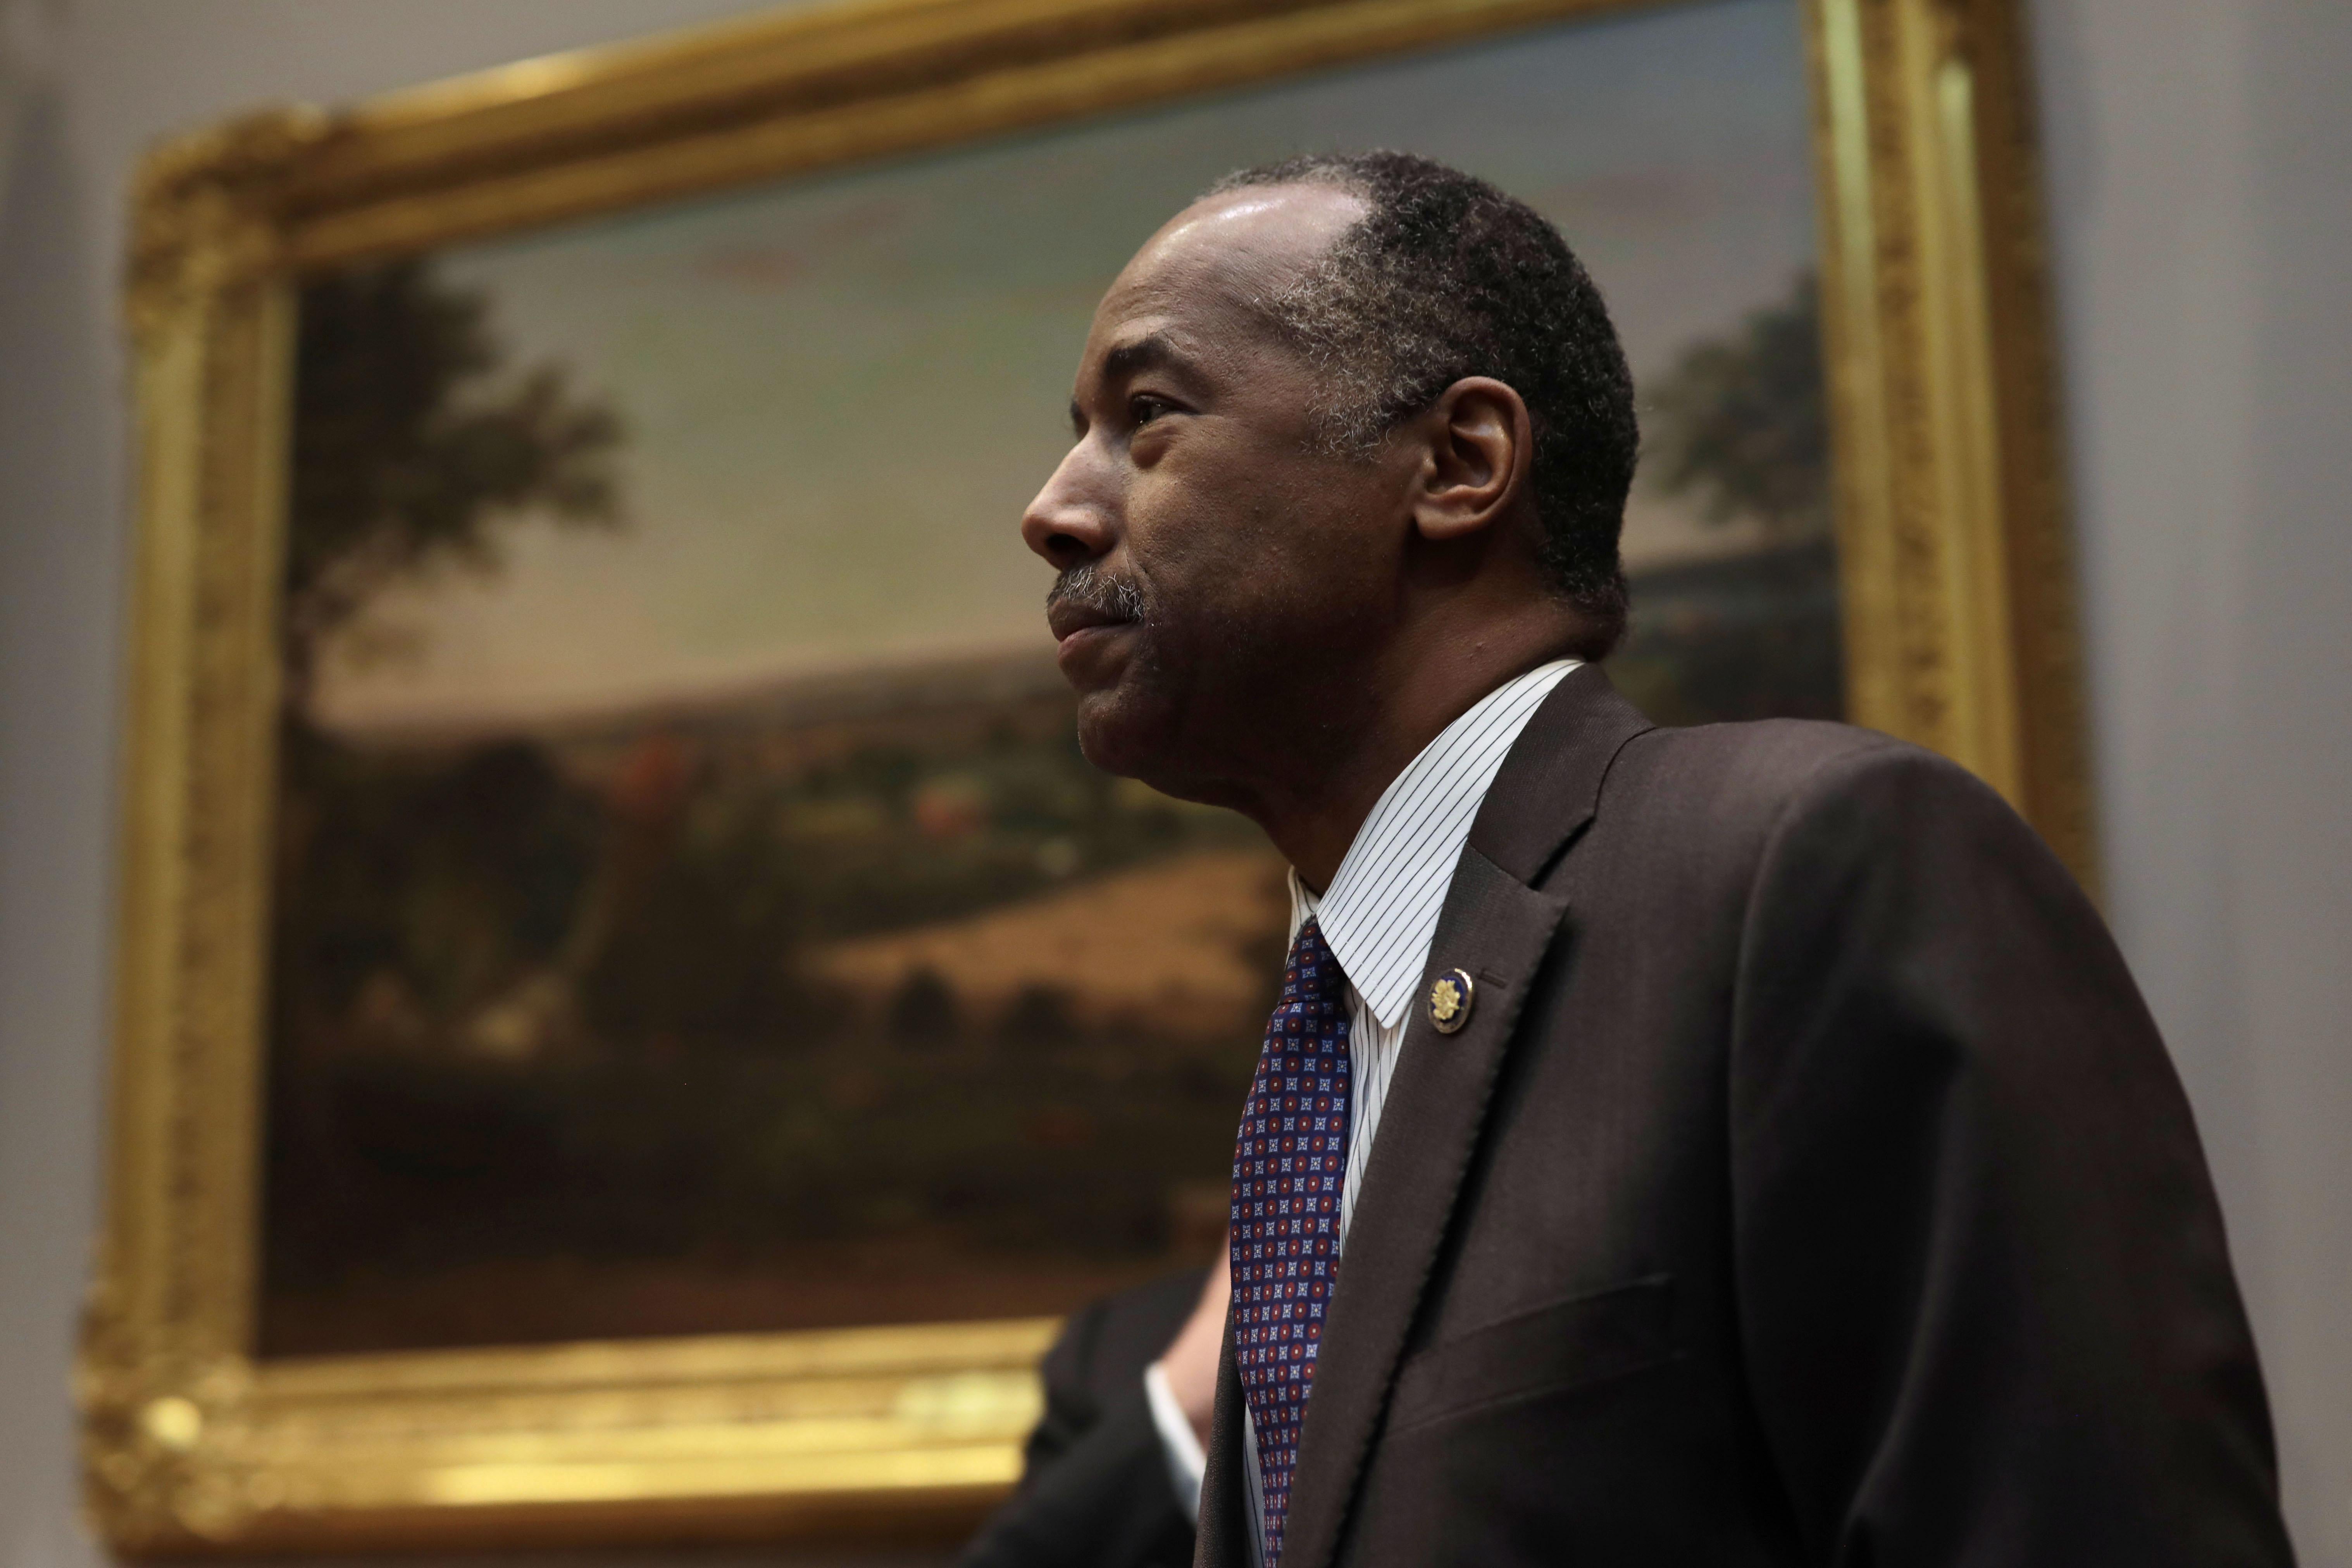 Ben Carson standing by a painting in the White House.